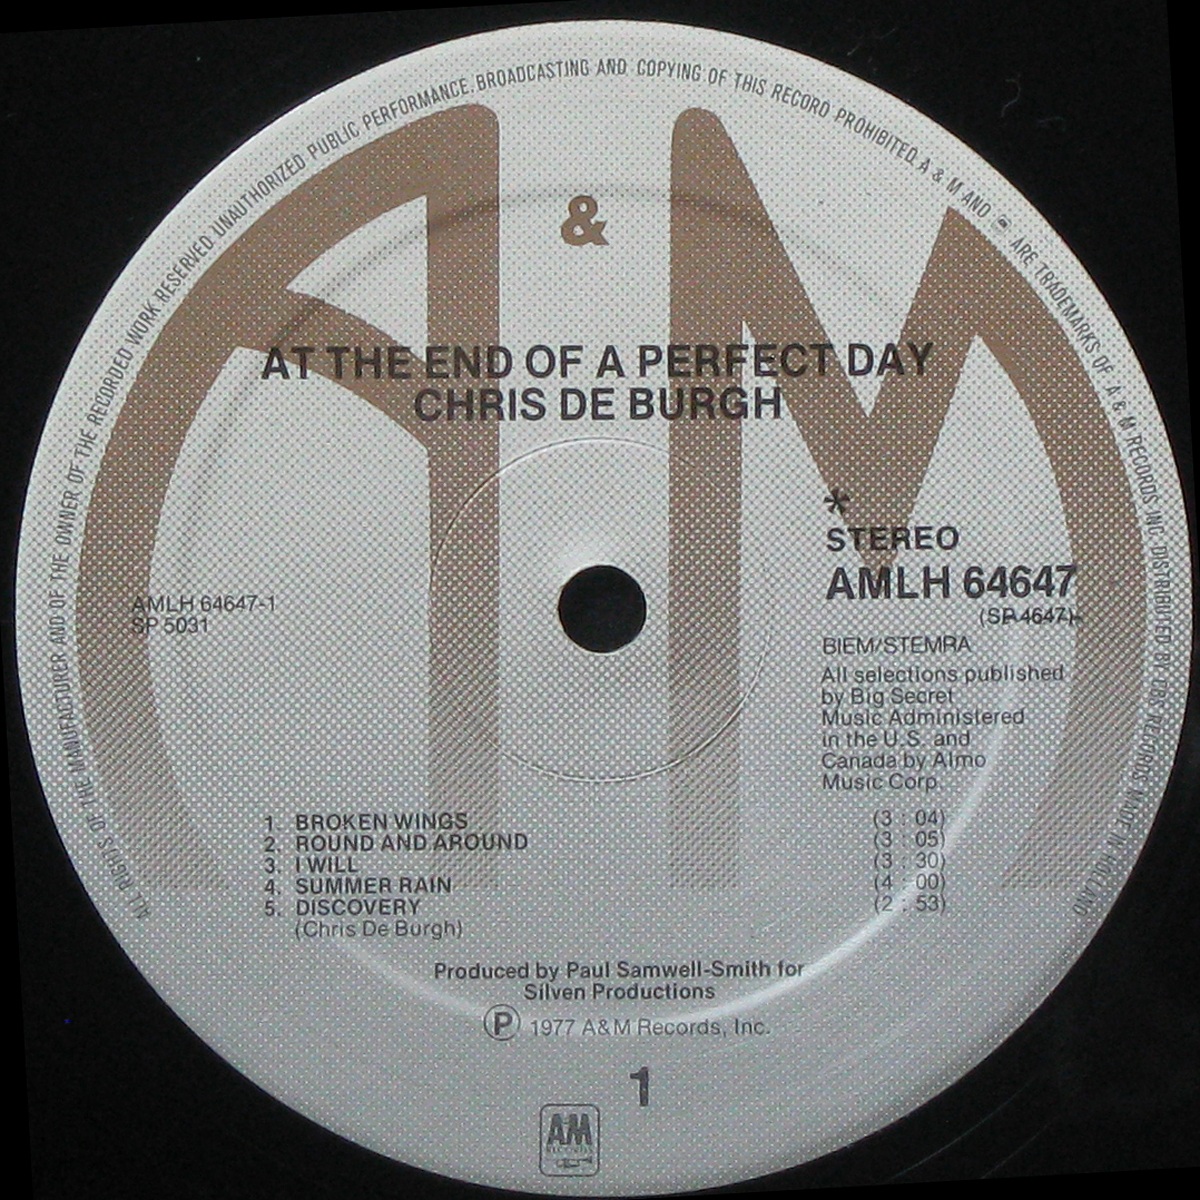 LP Chris De Burgh — At The End Of A Perfect Day фото 2